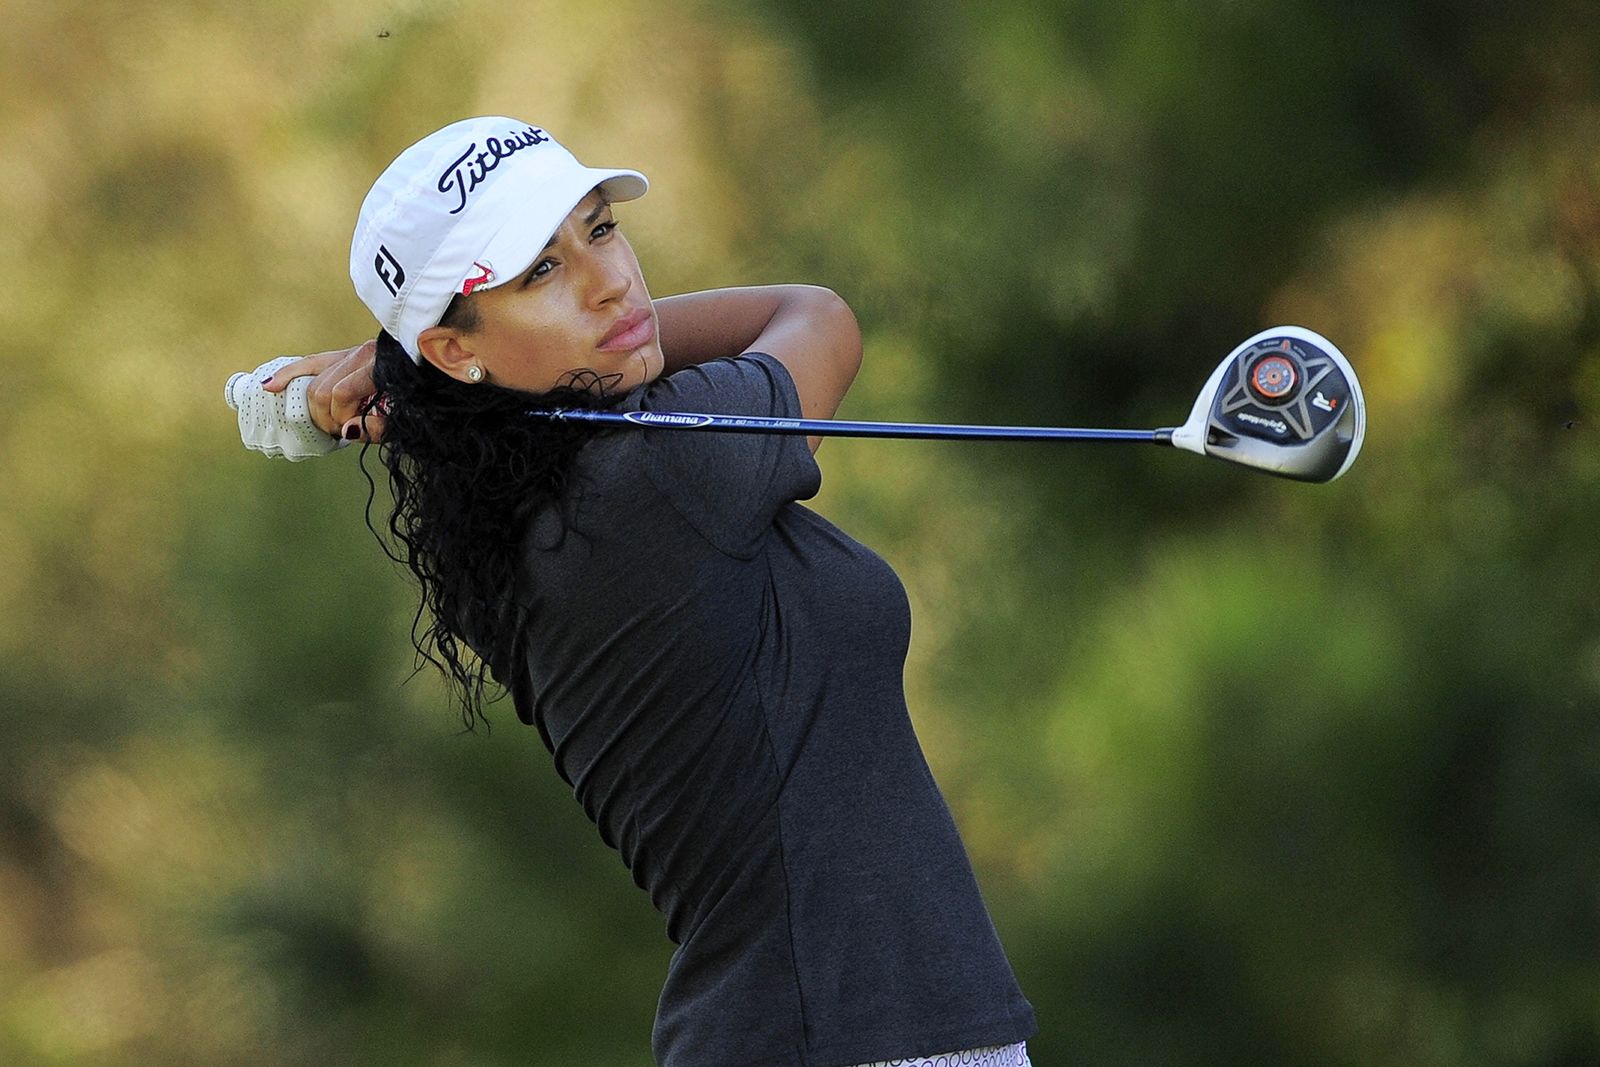 There's a dearth of Black players on the LPGA Tour. This woman